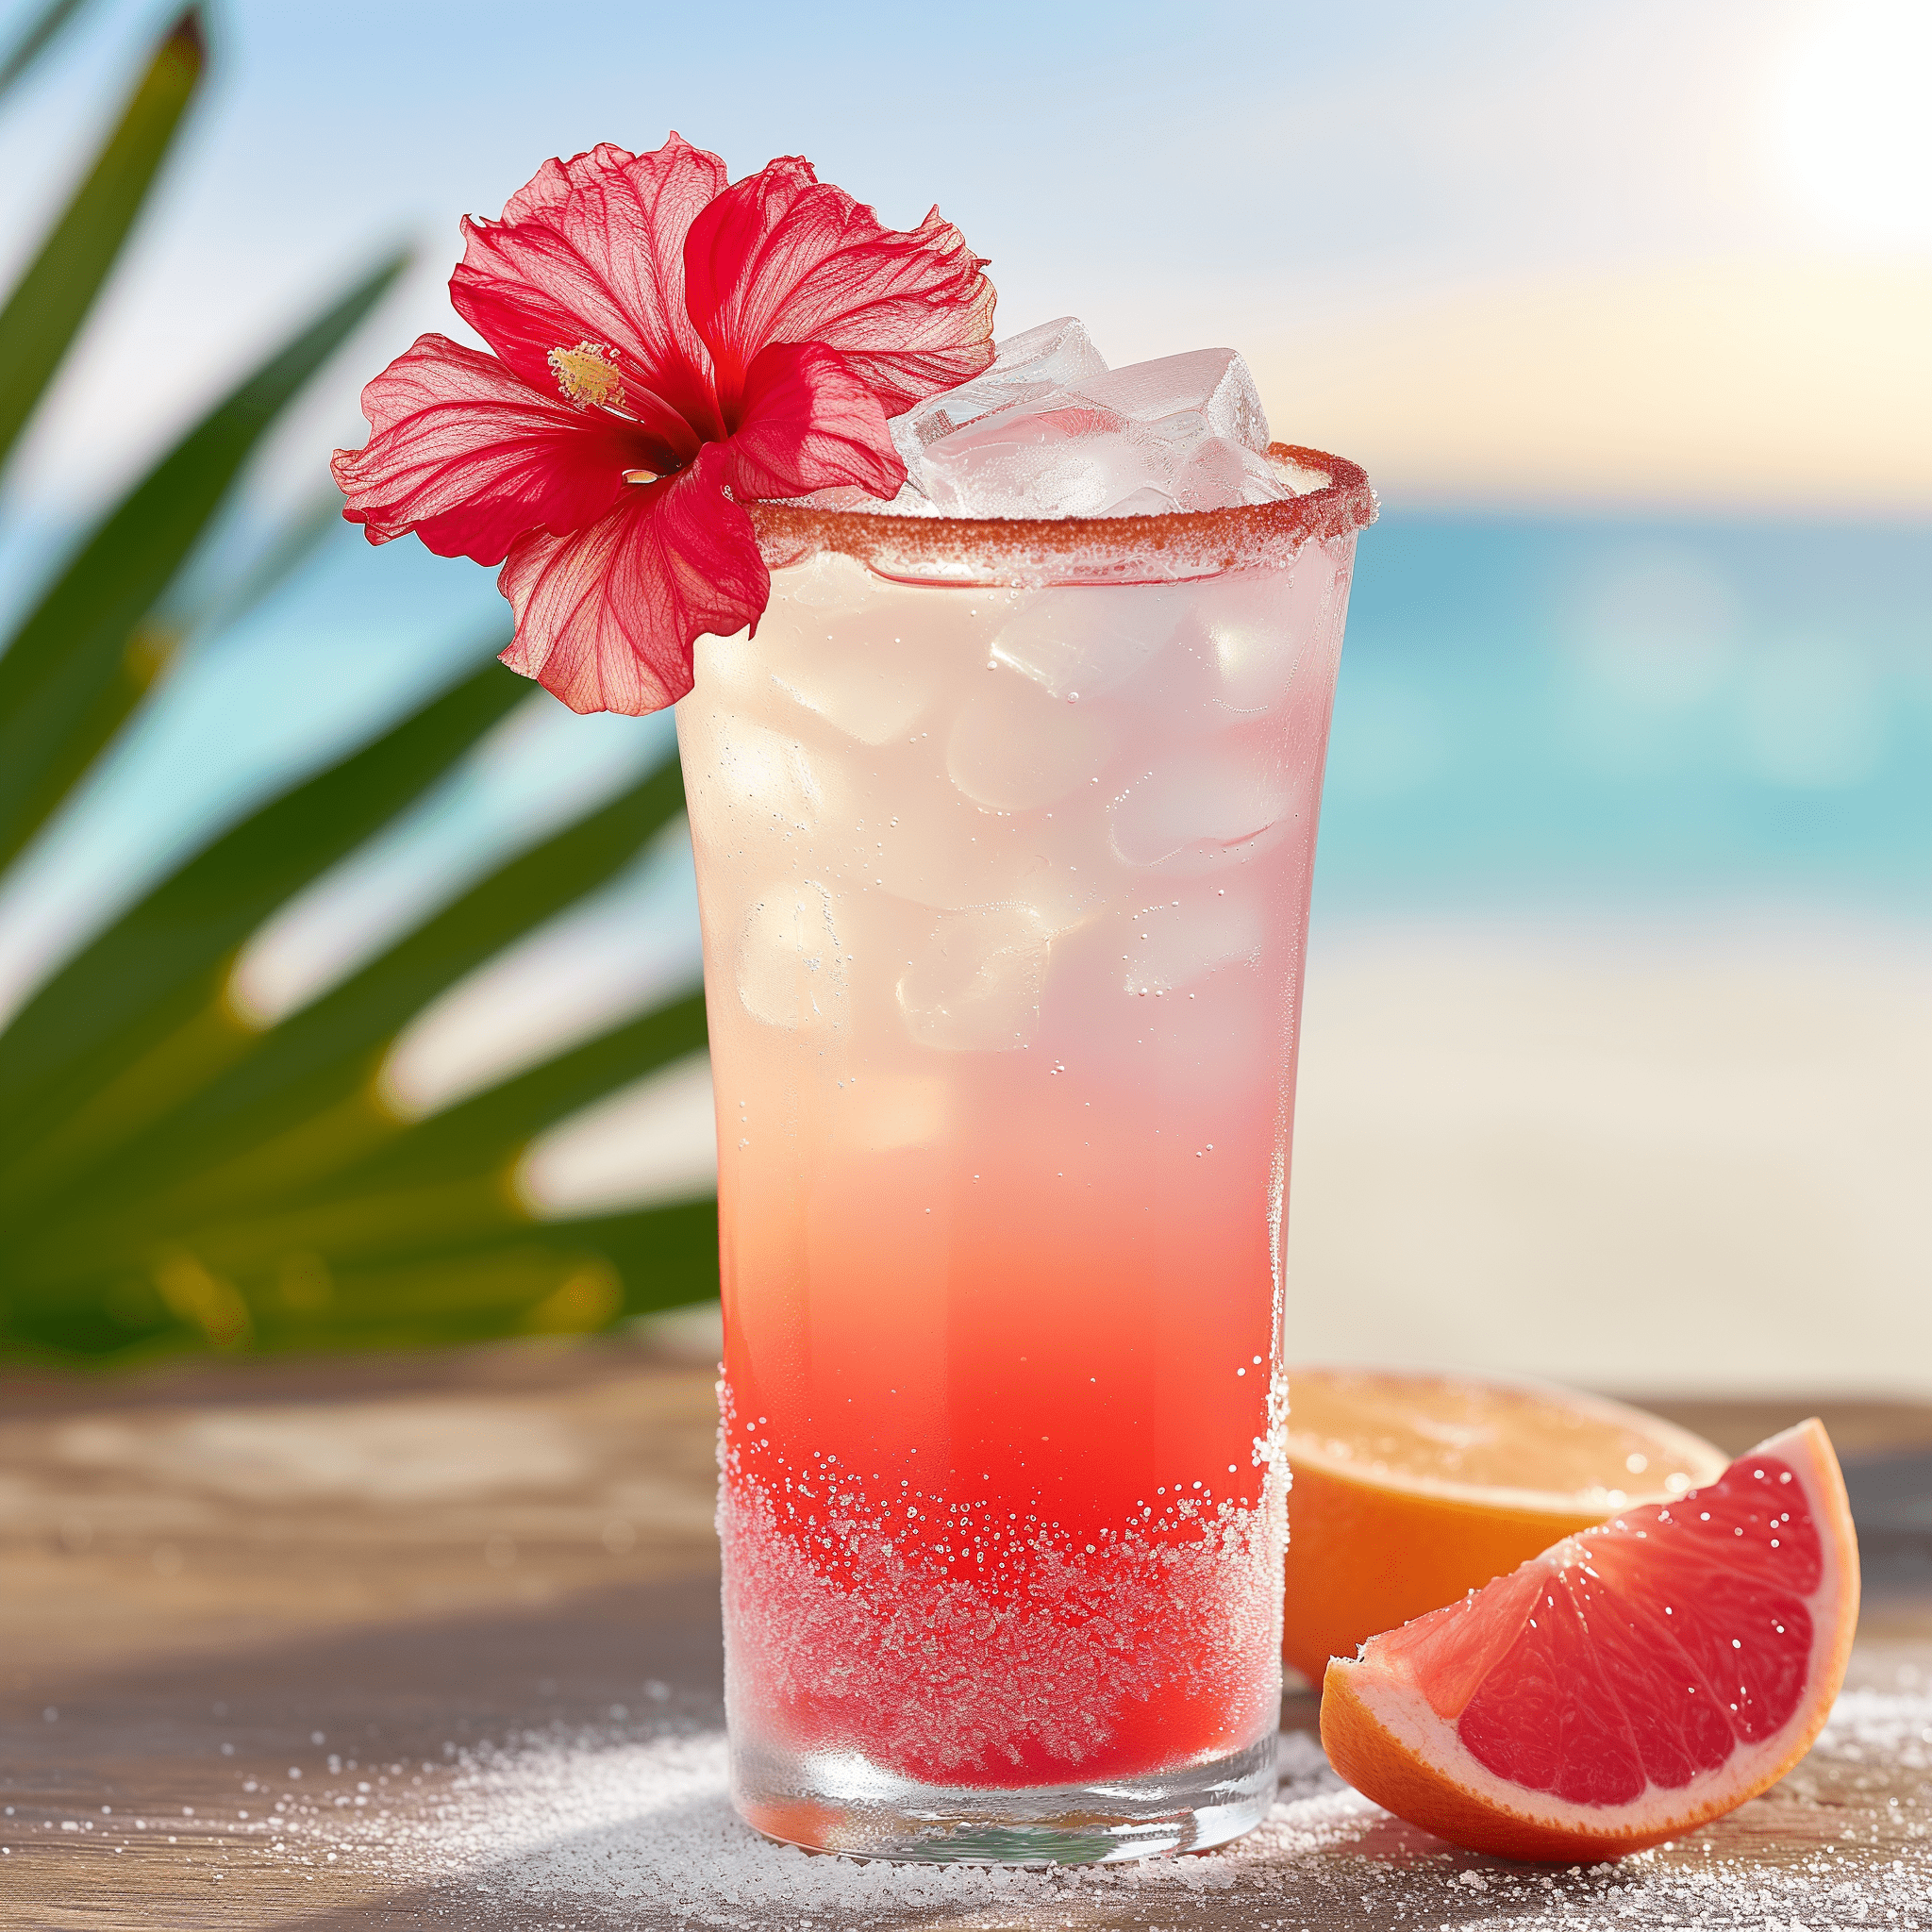 The Hibiscus Paloma is a harmonious blend of sweet and tart, with the tanginess of grapefruit juice and the subtle sweetness of hibiscus syrup. The white tequila provides a smooth, agave-forward base, while the club soda adds a refreshing fizz. The salted rim brings a savory contrast that enhances the overall flavor profile.